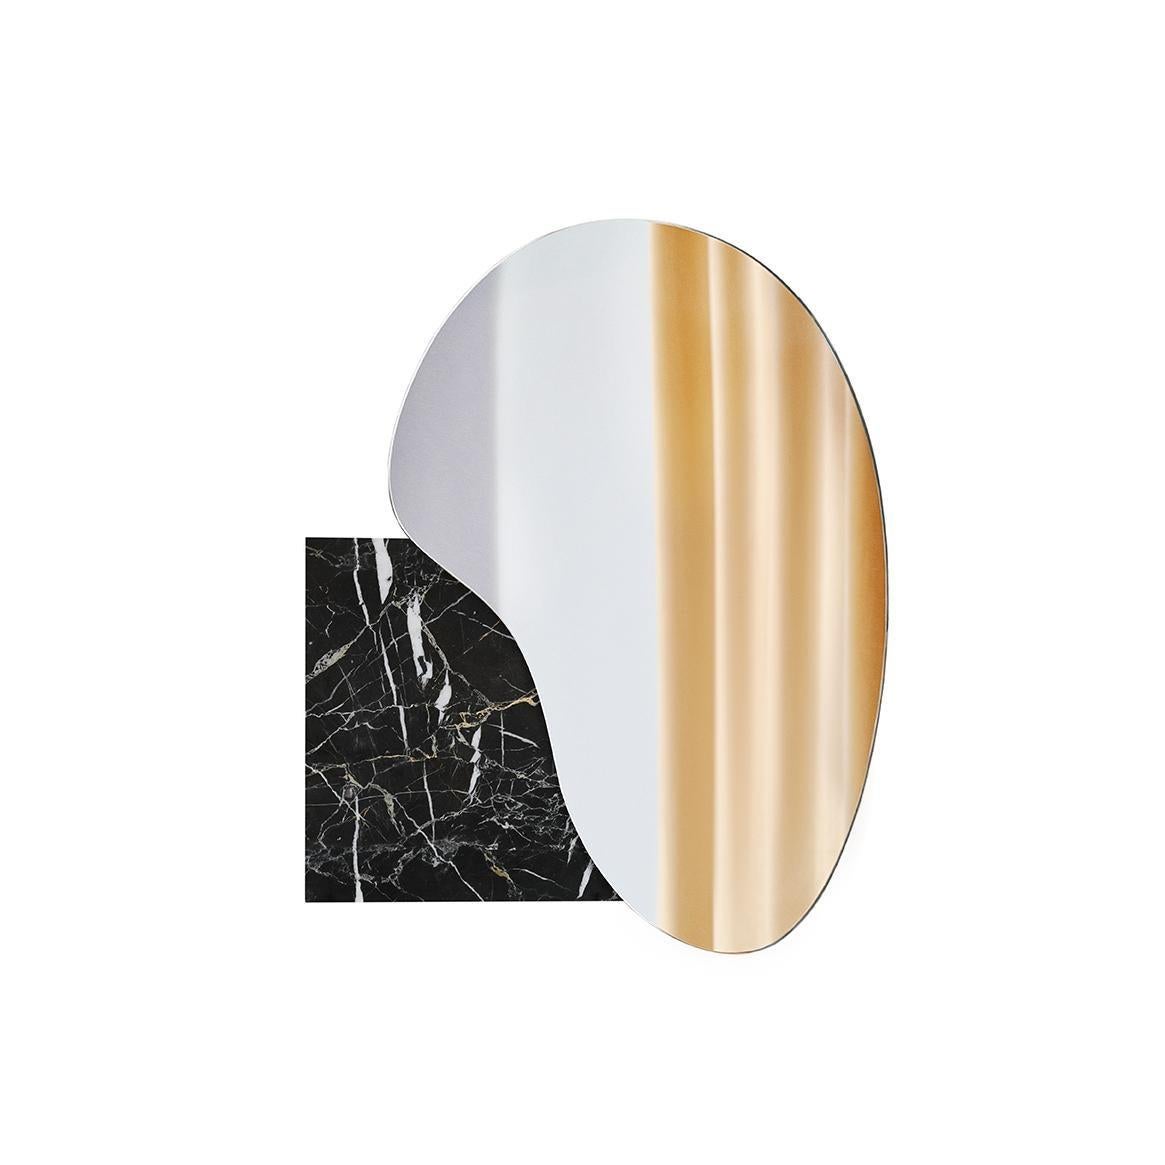 Painted Contemporary Wall Mirror Lake 4 by Noom, Brushed Brass Frame For Sale